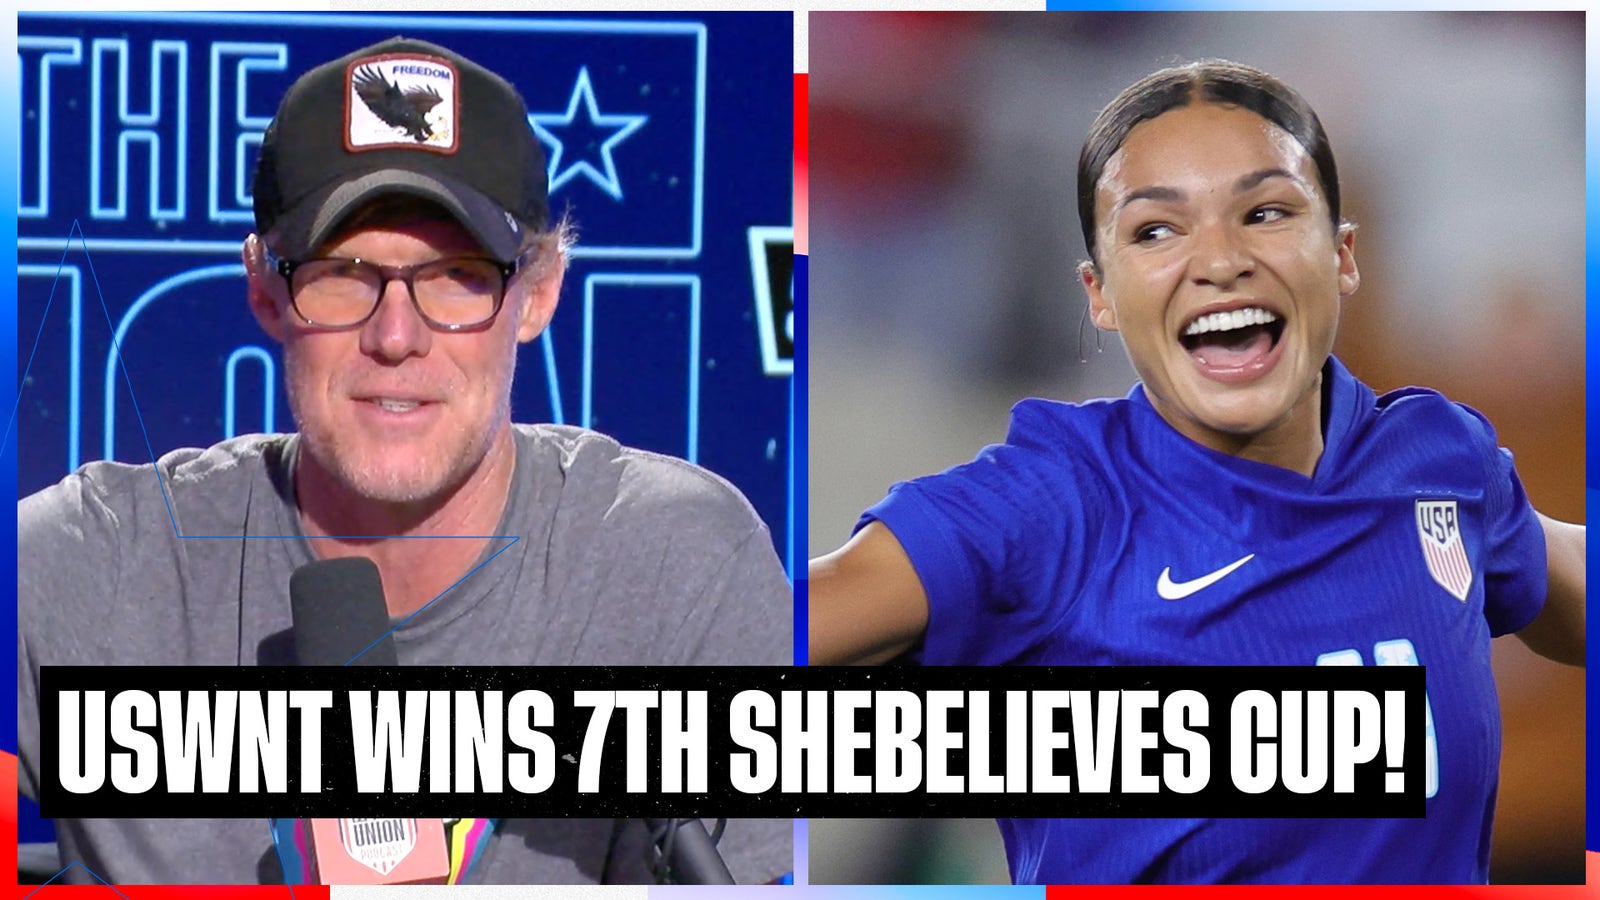 USWNT wins fifth straight SheBelieves Cup behind Sophia Smith